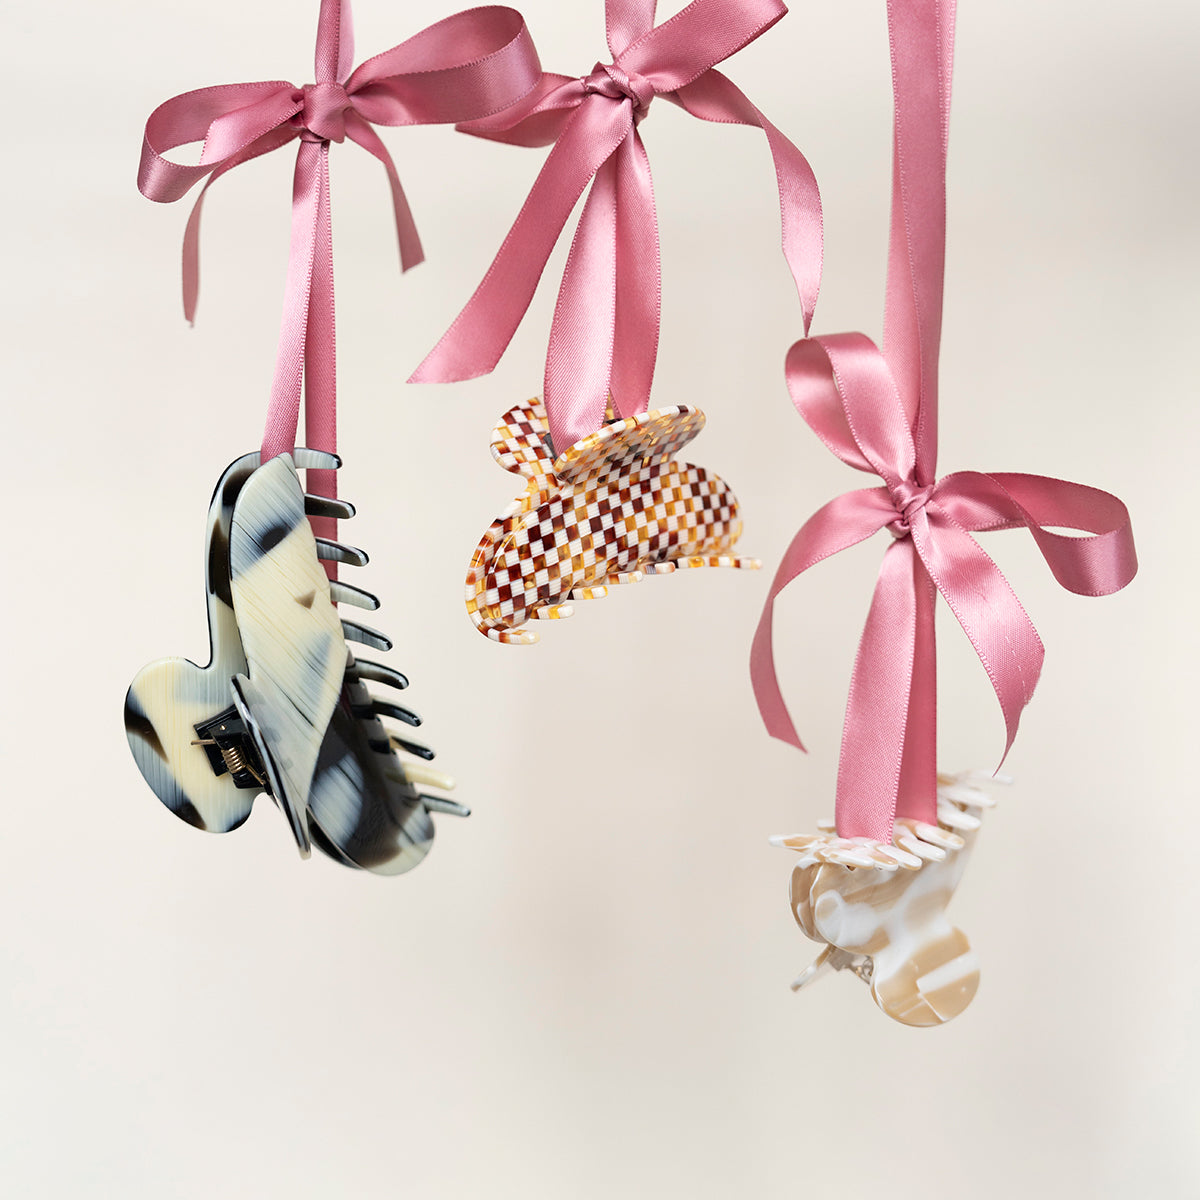 France Luxe classic hair accessories are perfect gifts for women - on sale now 30% off!